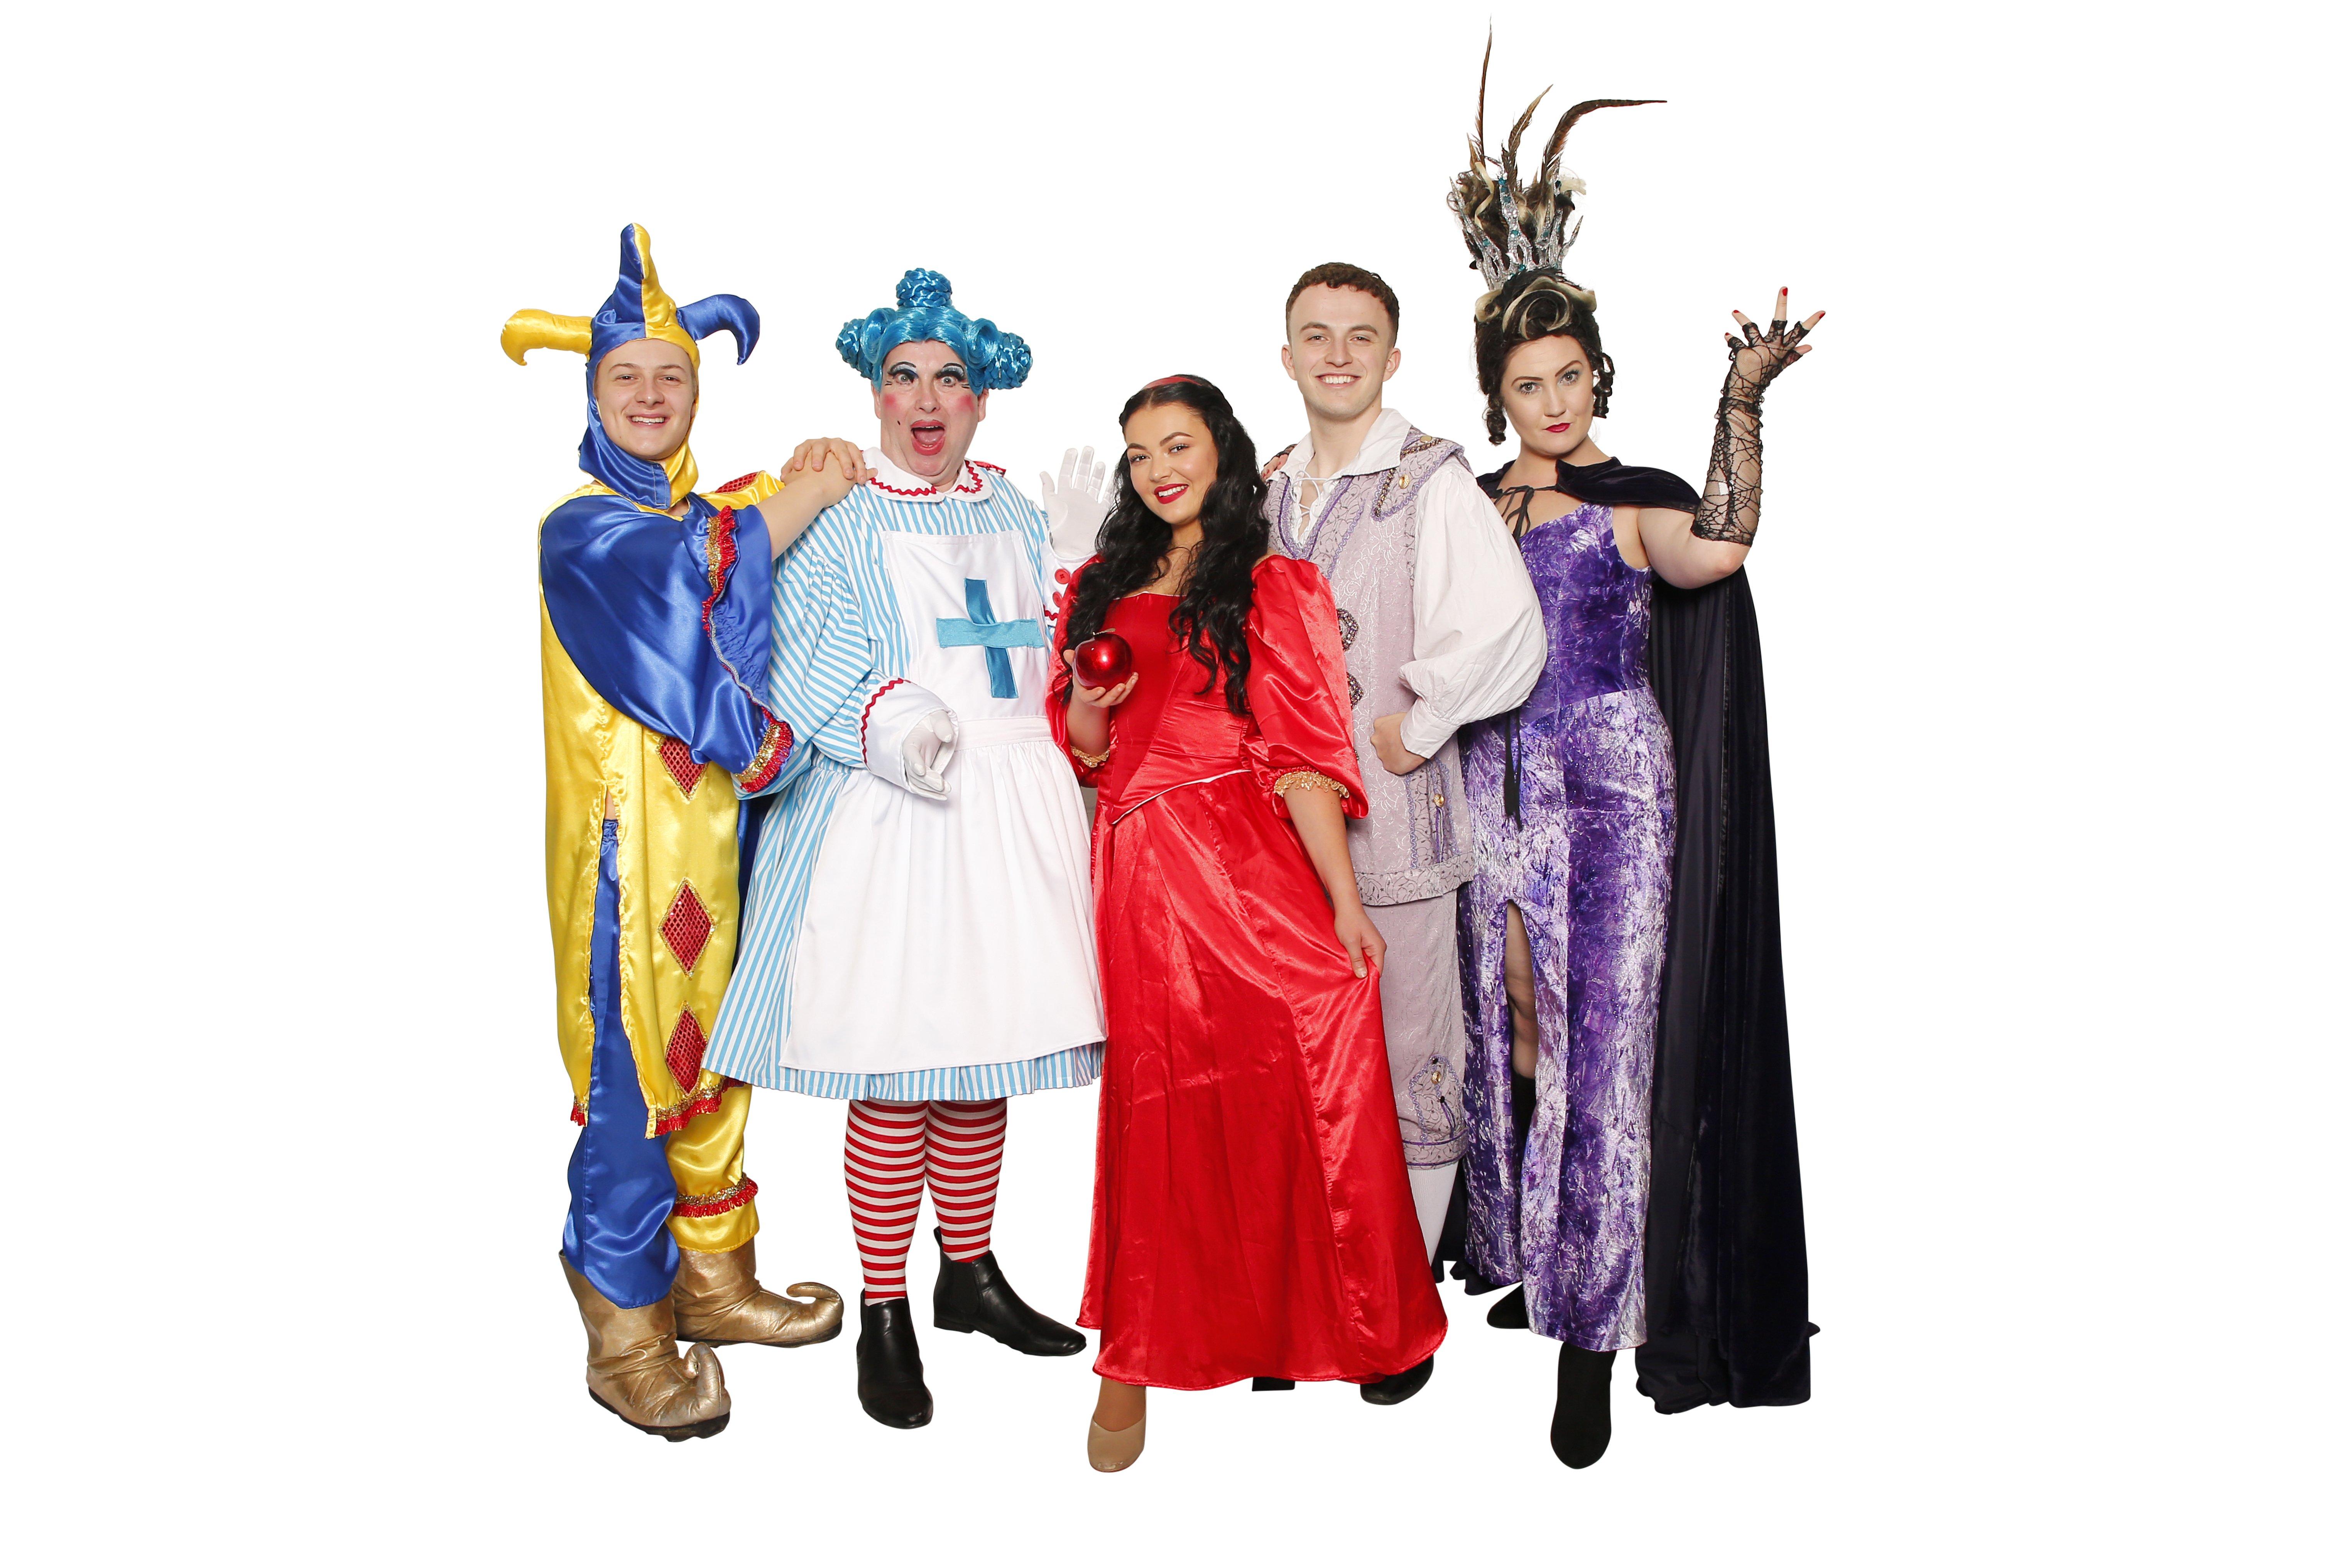 Snow White is being performed at Ropetackle Arts Centre, Little High Street, Shoreham-By-Sea from December 13 2019 to December 31 2019.